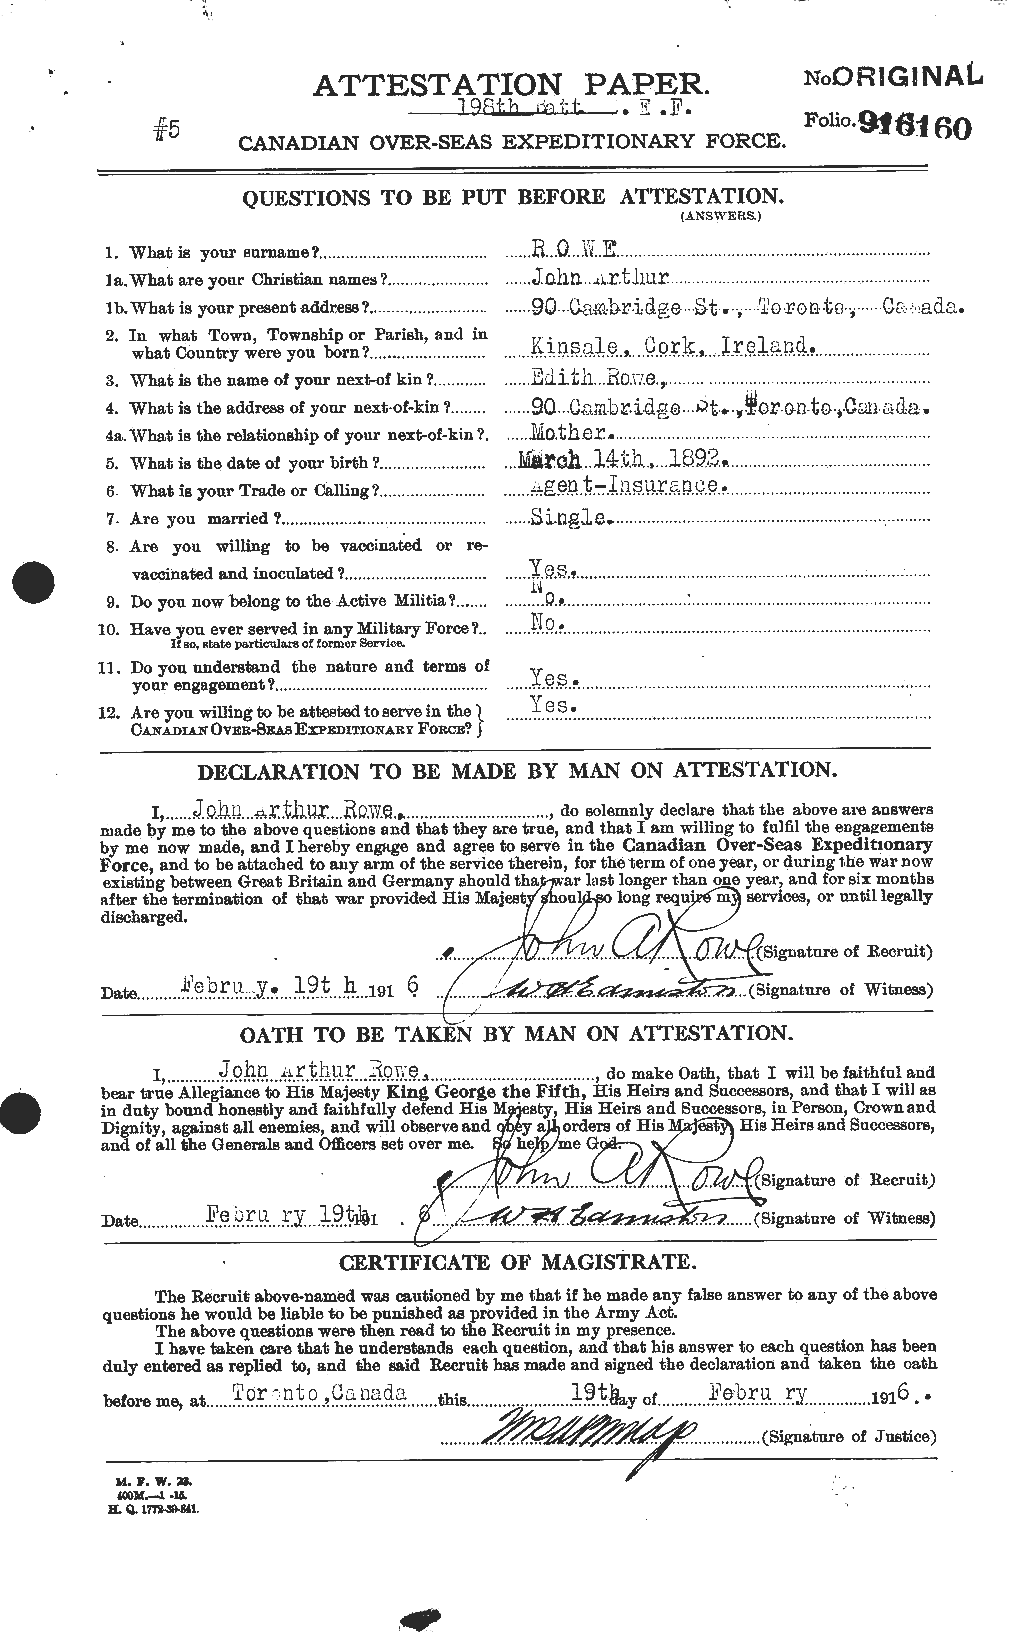 Personnel Records of the First World War - CEF 615927a